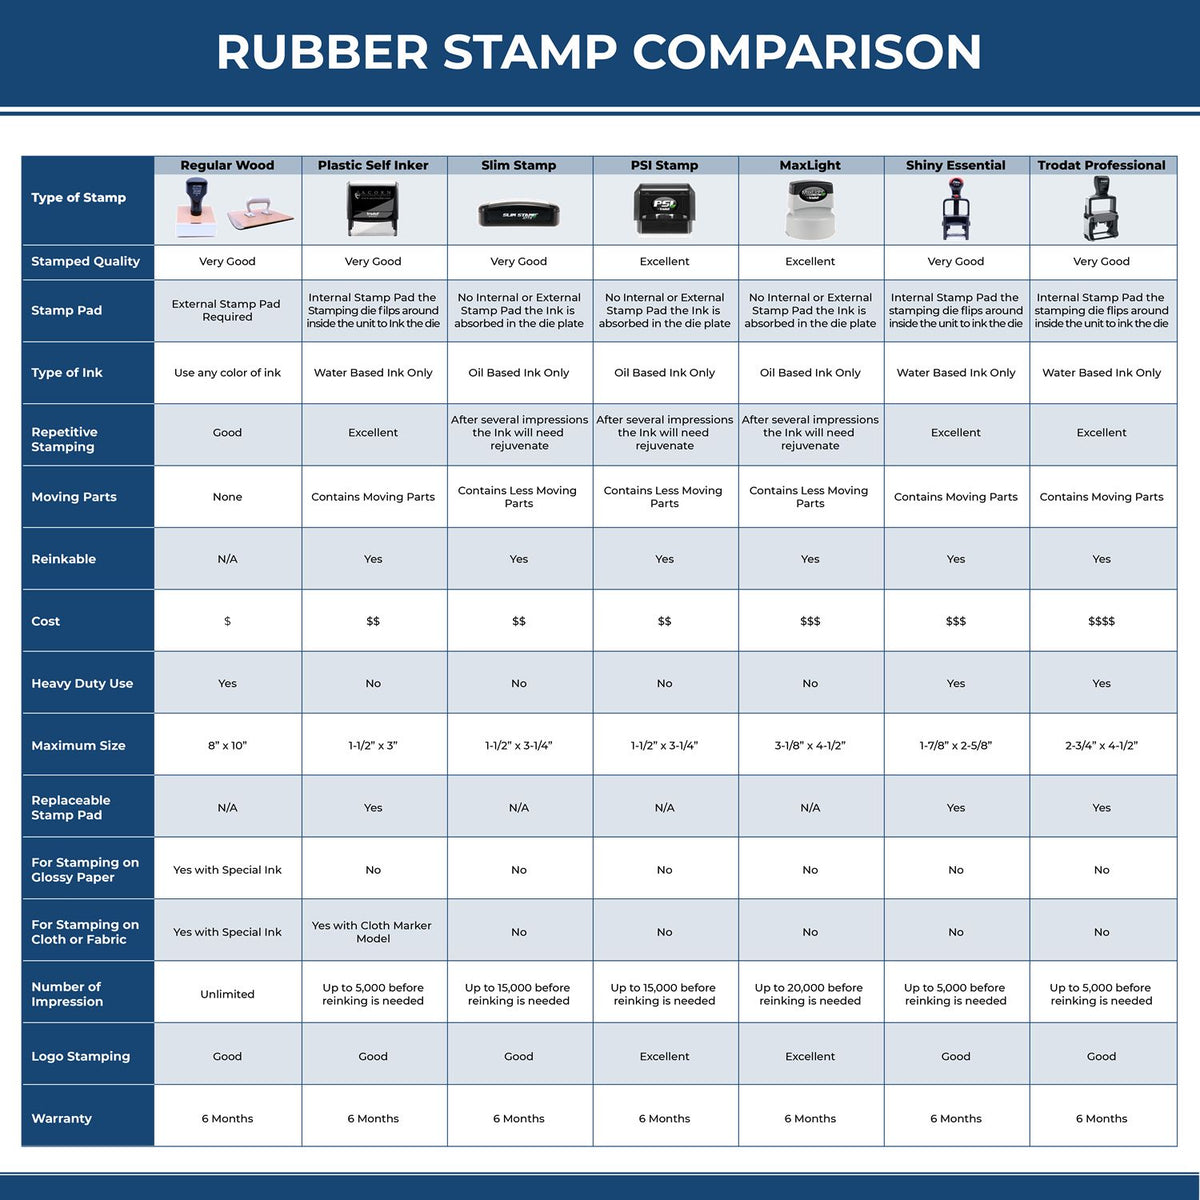 A comparison chart for the different types of mount models available for the Self-Inking Colorado PE Stamp.